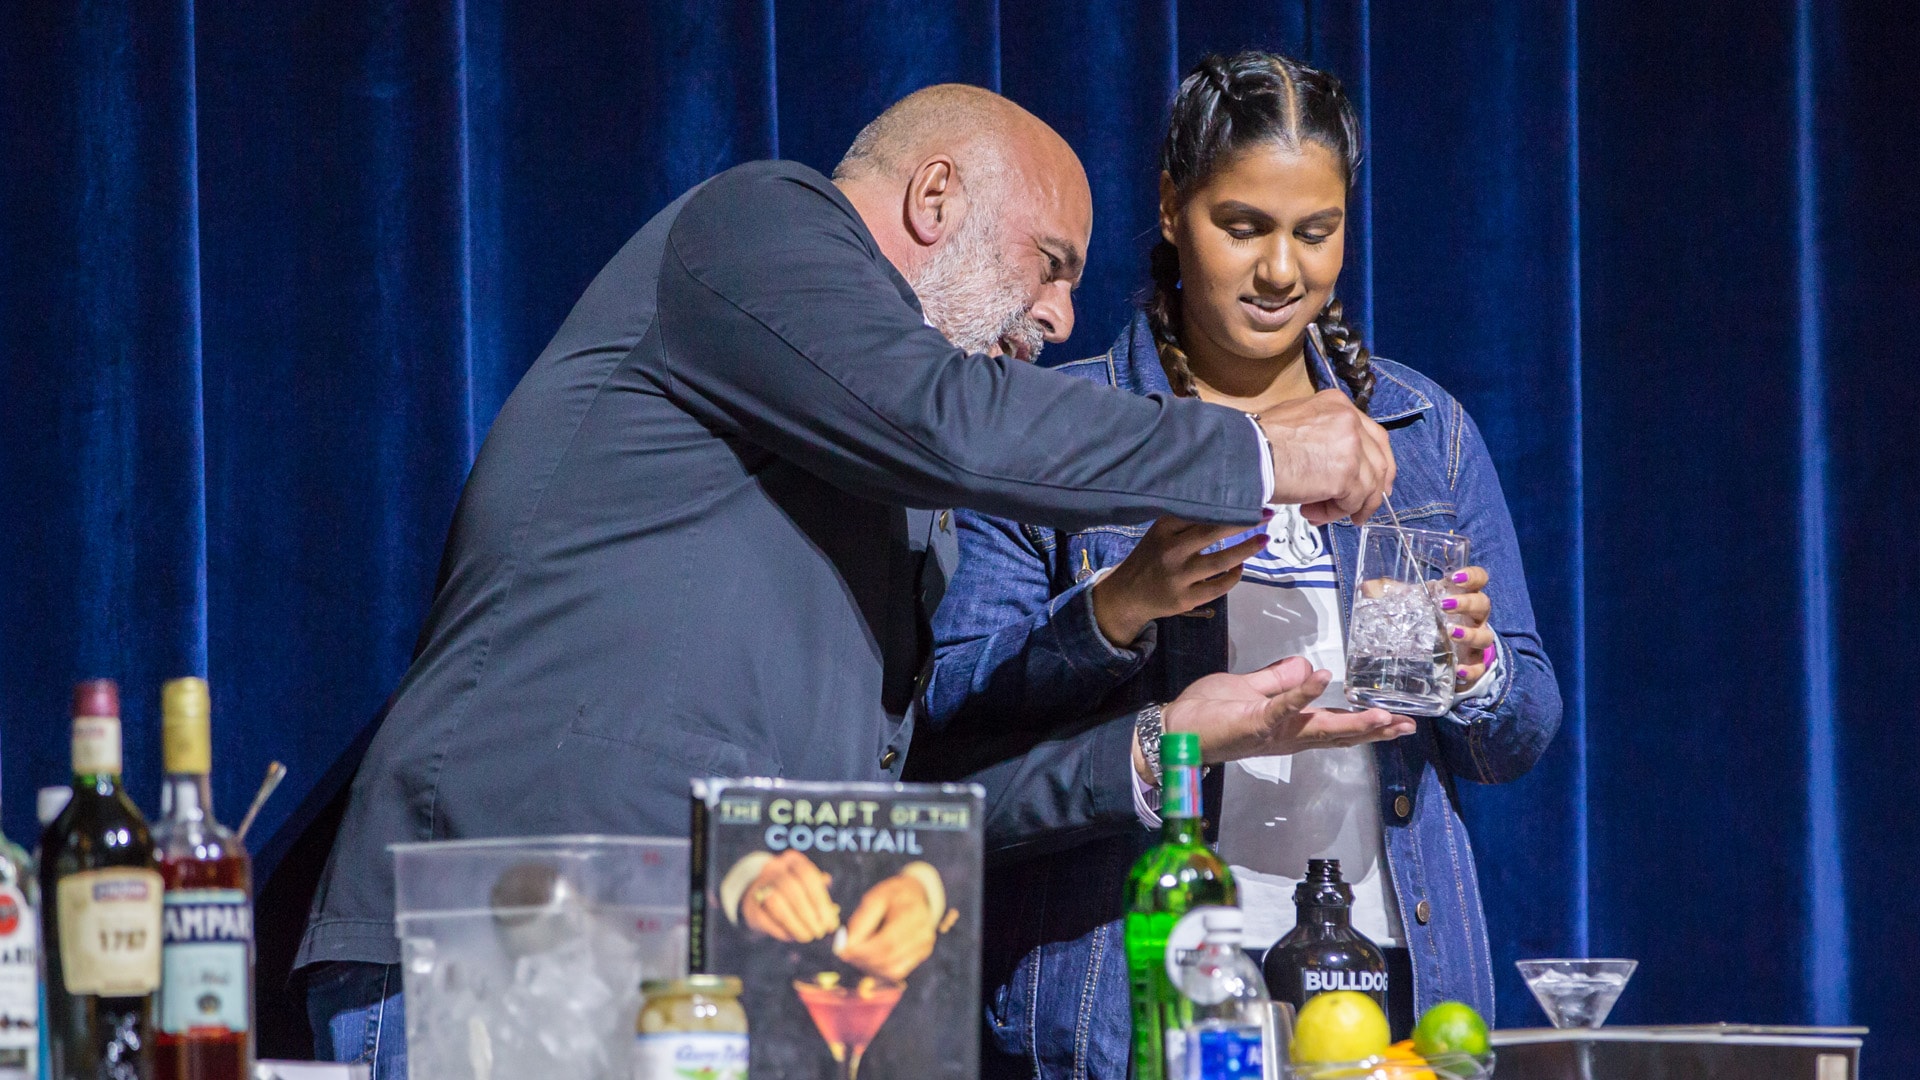 Tony Abou-Ganim demonstrates to JWU student how to mix a cocktail.